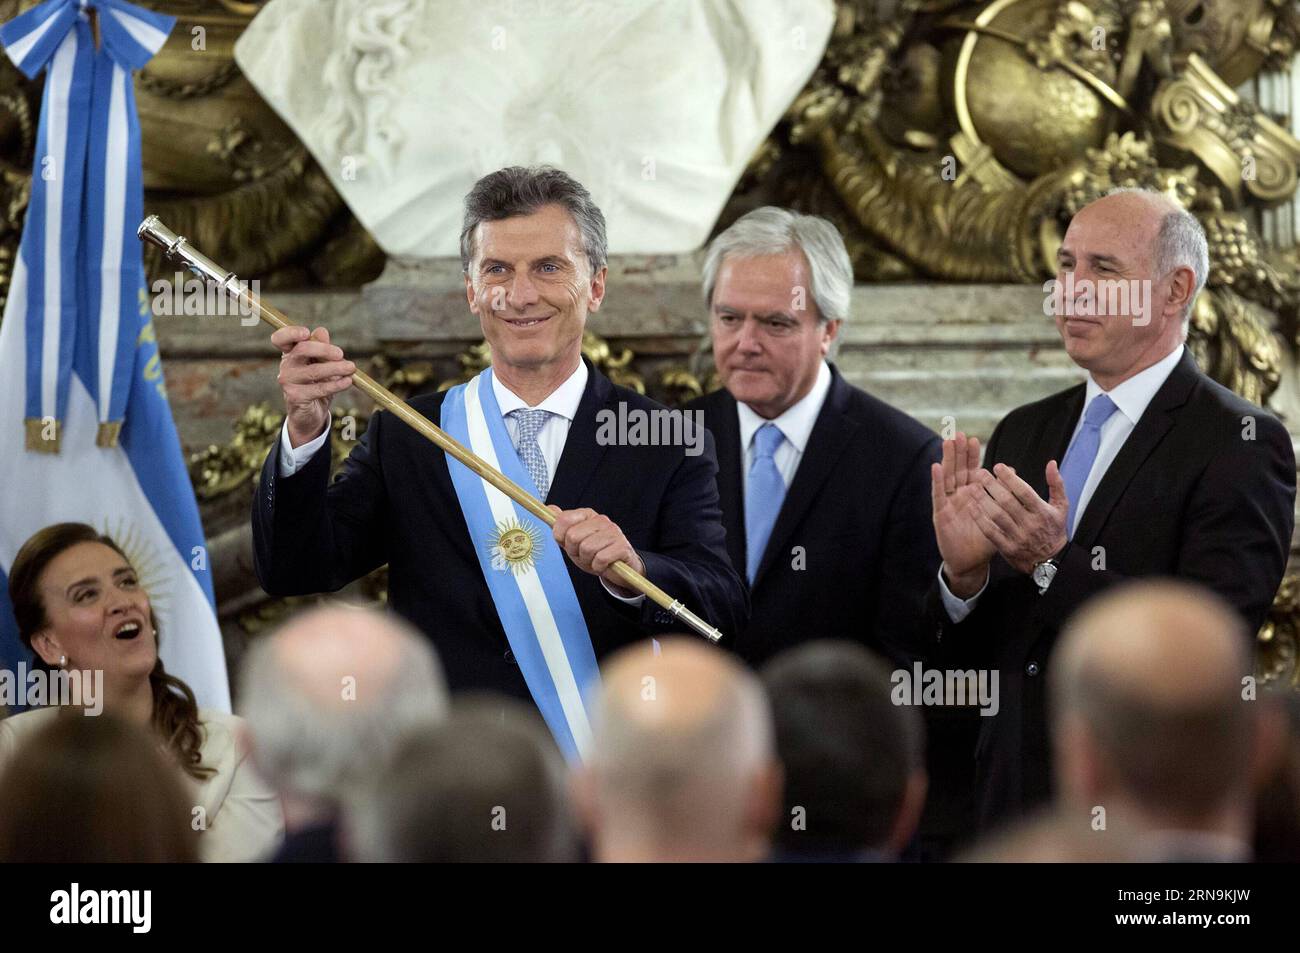 (151210) -- BUENOS AIRES, Dec. 10, 2015 -- Argentina s new President Mauricio Macri (2nd L) shows the baton after receiving it from the provisional President of the Argentine Senate Federico Pinedo (2nd R) at White Room of Casa Rosada (Pink House), in Buenos Aires city, capital of Argentina, on Dec. 10, 2015. Mauricio Macri on Thursday inaugurated as new Argentine President, succeeding Cristina Fernandez. Martin Zabala) (fnc) (ah) ARGENTINA-BUENOS AIRES-POLITICS-INAUGURATION e MARTINxZABALA PUBLICATIONxNOTxINxCHN   151210 Buenos Aires DEC 10 2015 Argentina S New President Mauricio Macri 2nd l Stock Photo